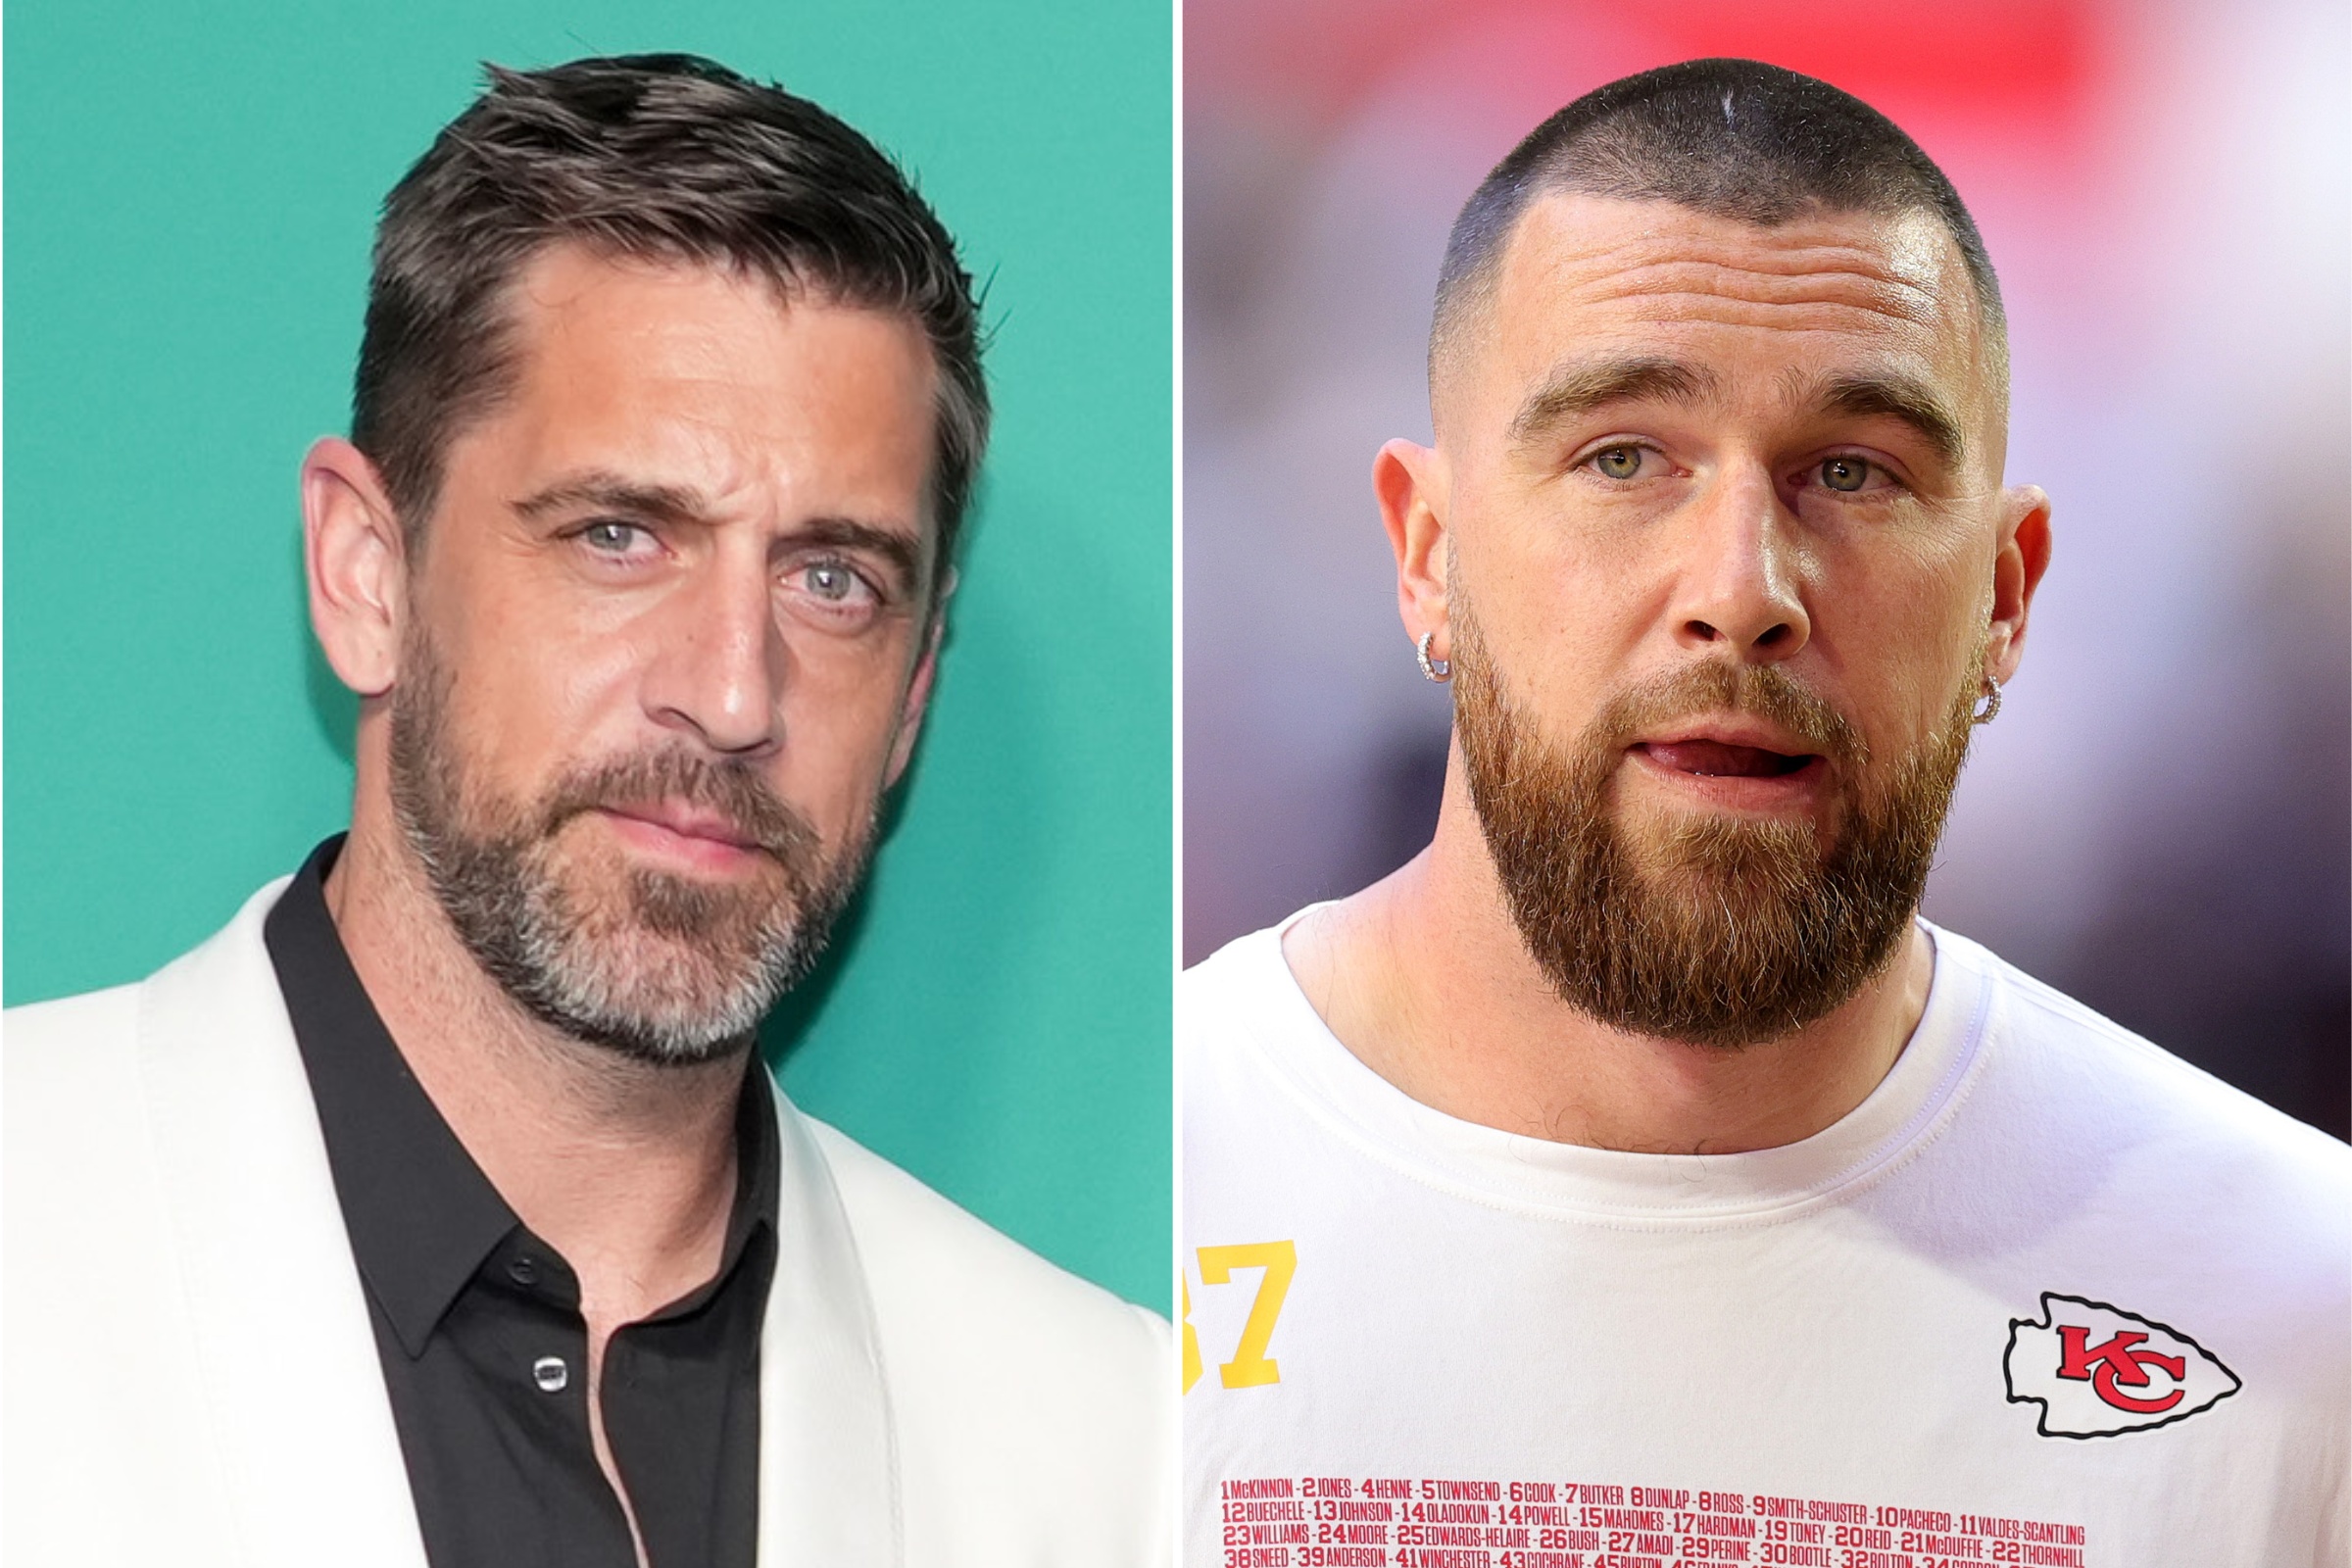  Aaron Rodgers Send  Arrogant and Disrespectful Message  to Travis  Kelce after missing Taylor's special day ' worst boyfriend, I could do better  than him '